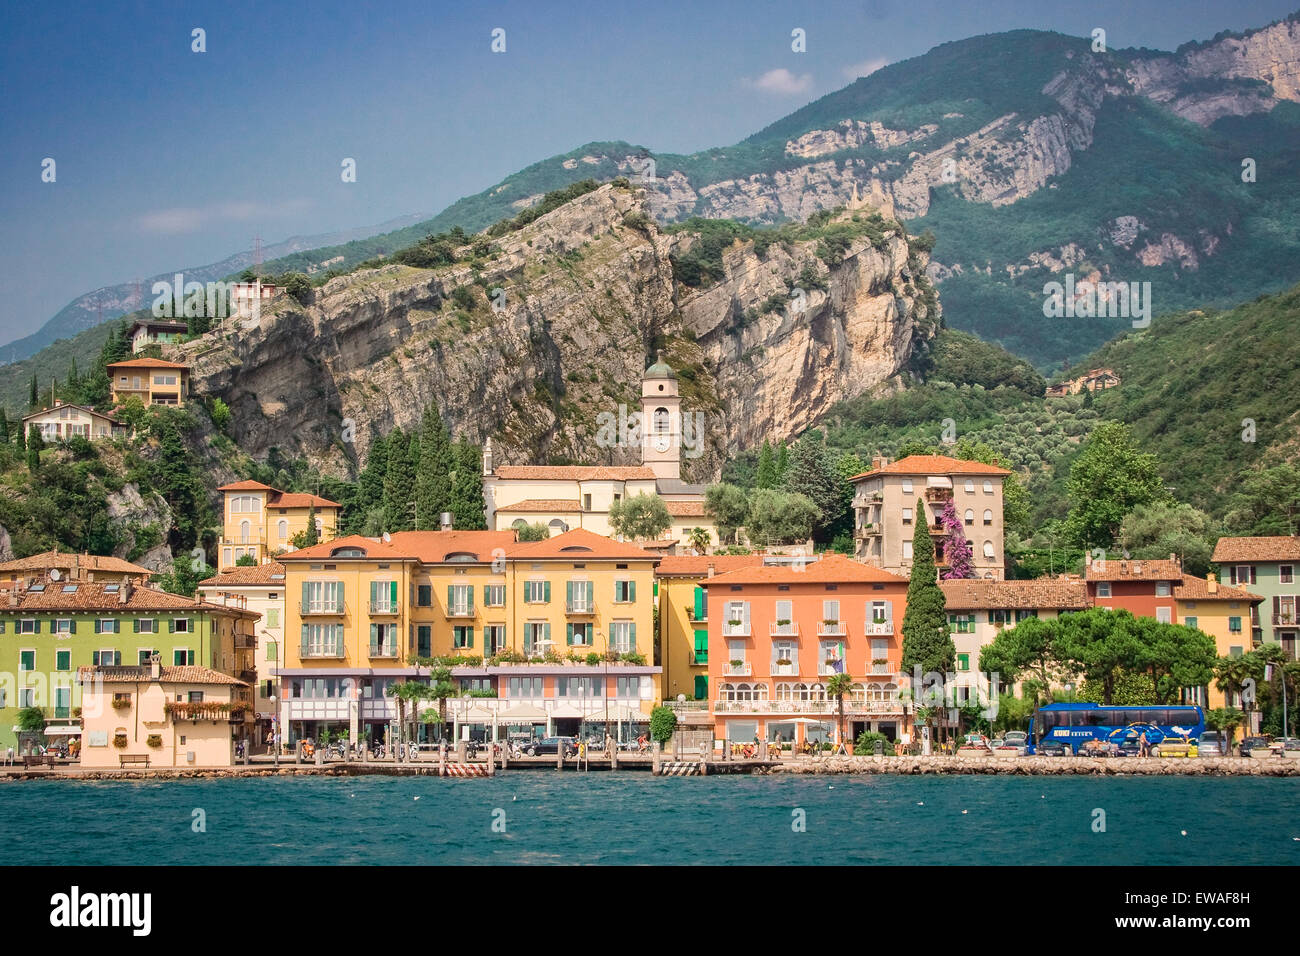 A view of this unique and colorful town Riva on Lake Garda in Italy, showing the land mass behind, a geographical feature. Stock Photo